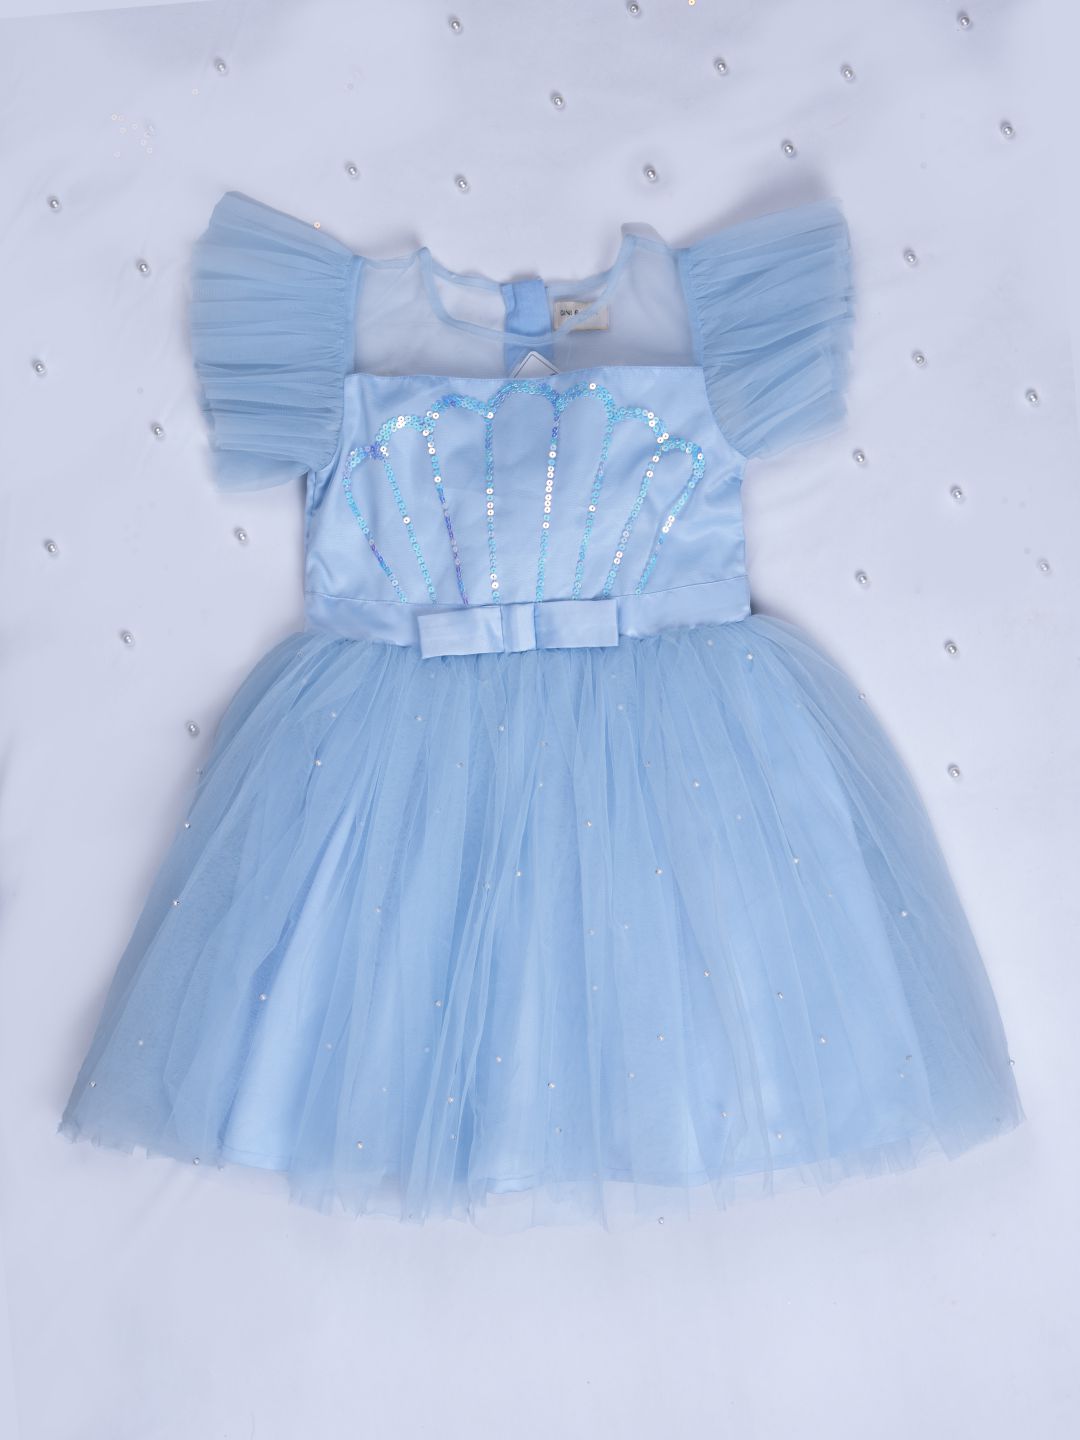 Girls blue party wear sequinned dress with lining.